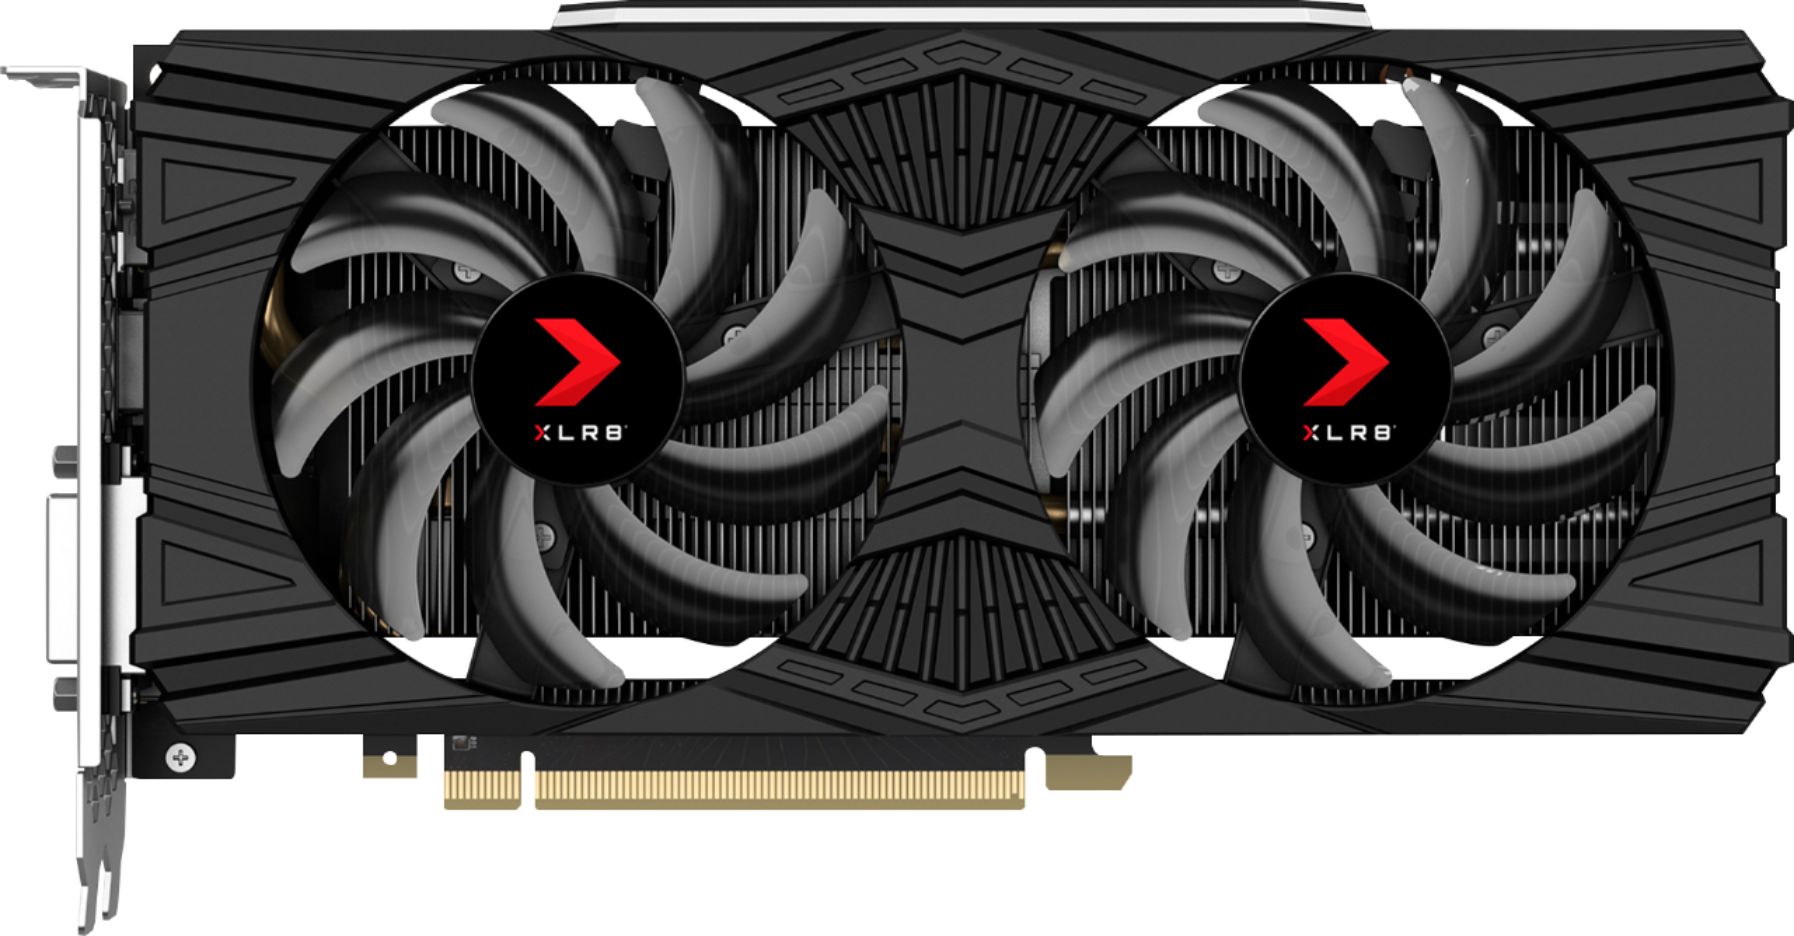 Ligegyldighed Citron Sanktion PNY XLR8 Gaming NVIDIA GeForce RTX 2070 Overclocked Edition 8GB GDDR6 PCI  Express 3.0 Graphics Card Black/Red VCG20708DFPPB-O-B - Best Buy